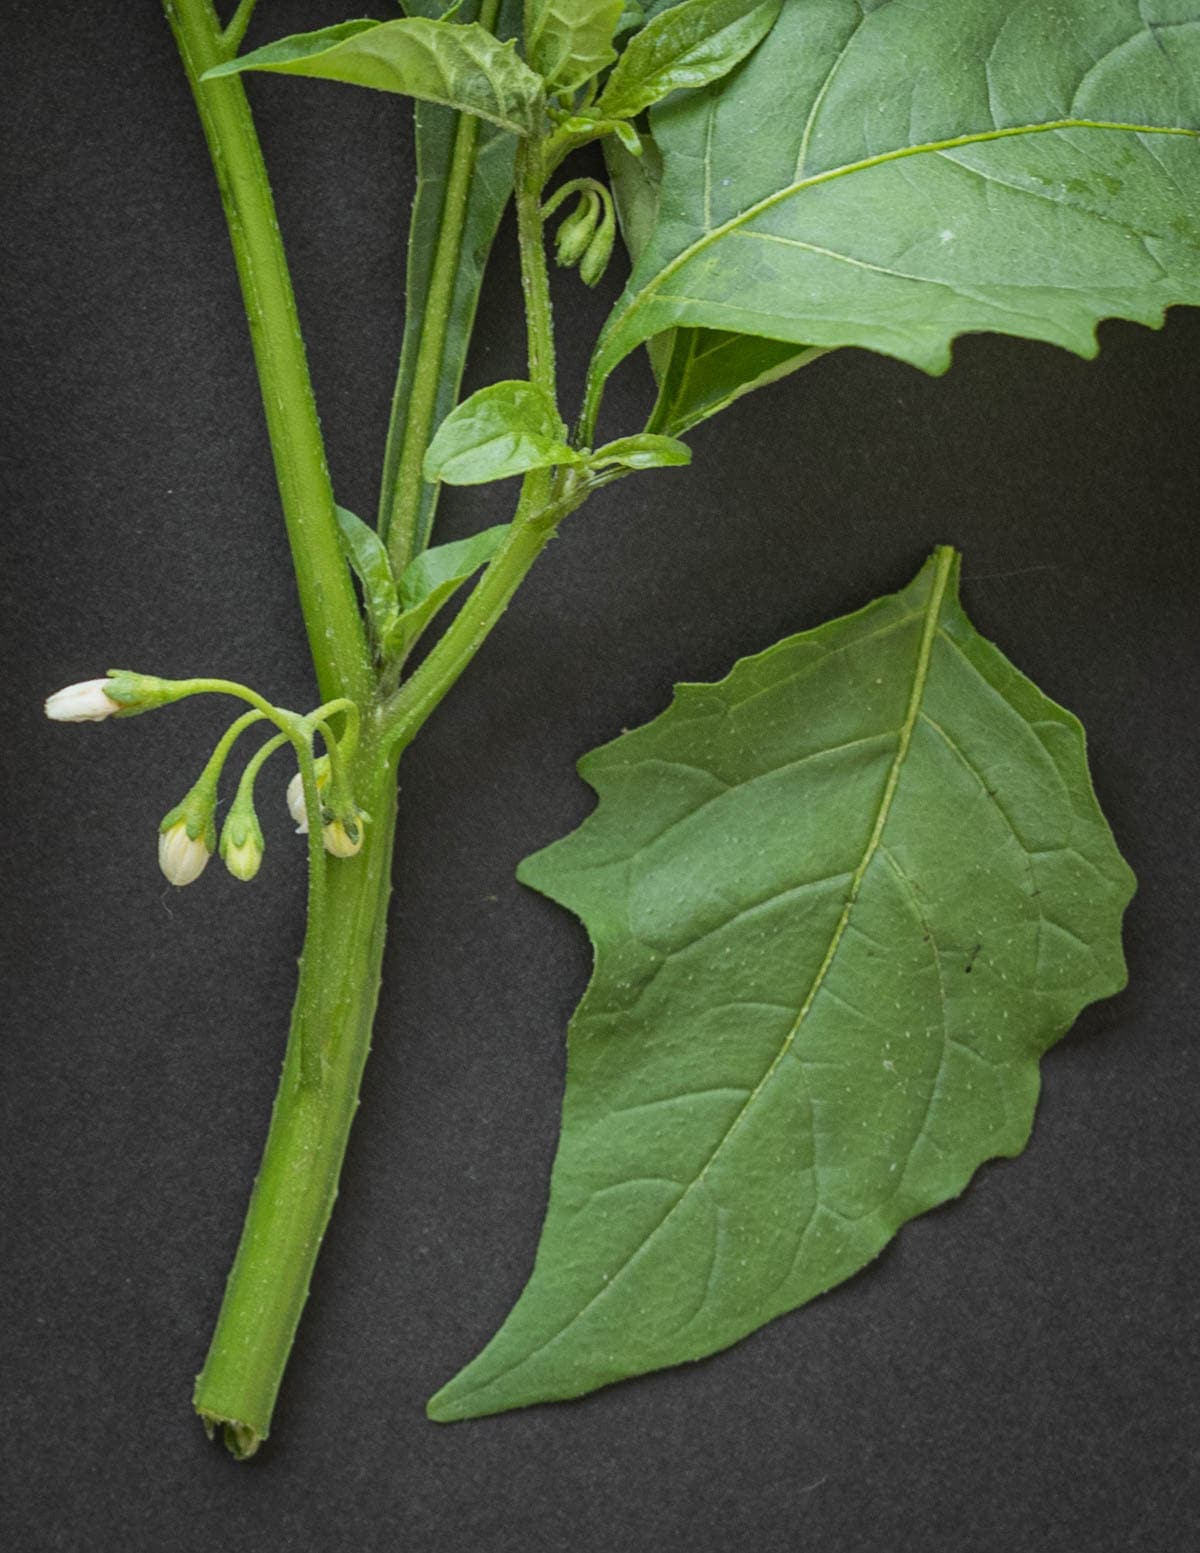 Macro image of black Eastern nightshade leaves, stems, and young inflorescence (Solanum ptycanthum).